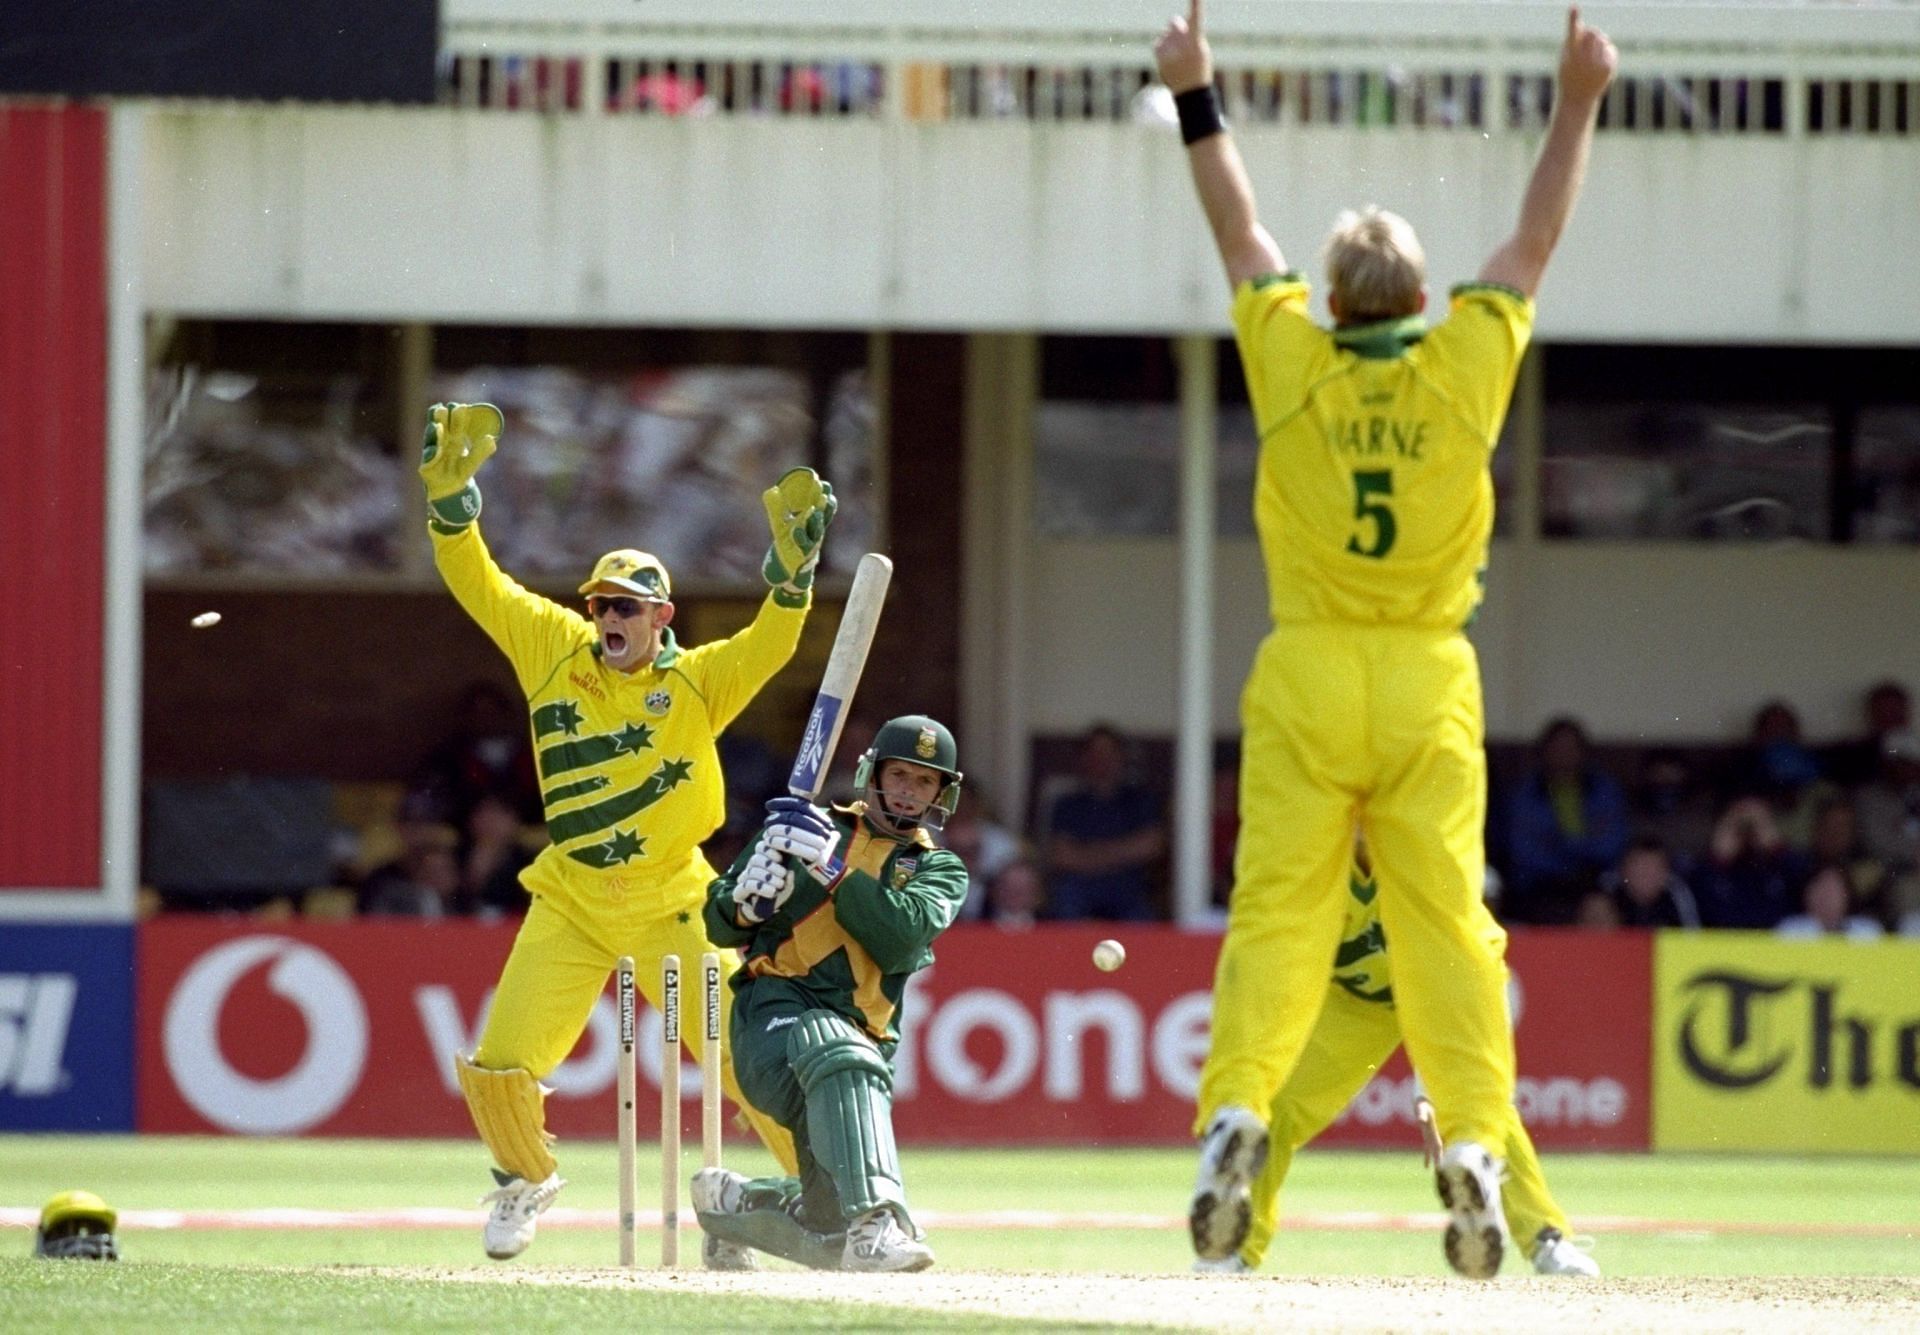 Gary Kirsten of South Africa is bowled by Shane Warne of Australia in the 1999 World Cup semi-final at Edgbaston in Birmingham, England. The match finished a tie as Australia went through after finishing higher in the Super Six table. Pic: Getty Images